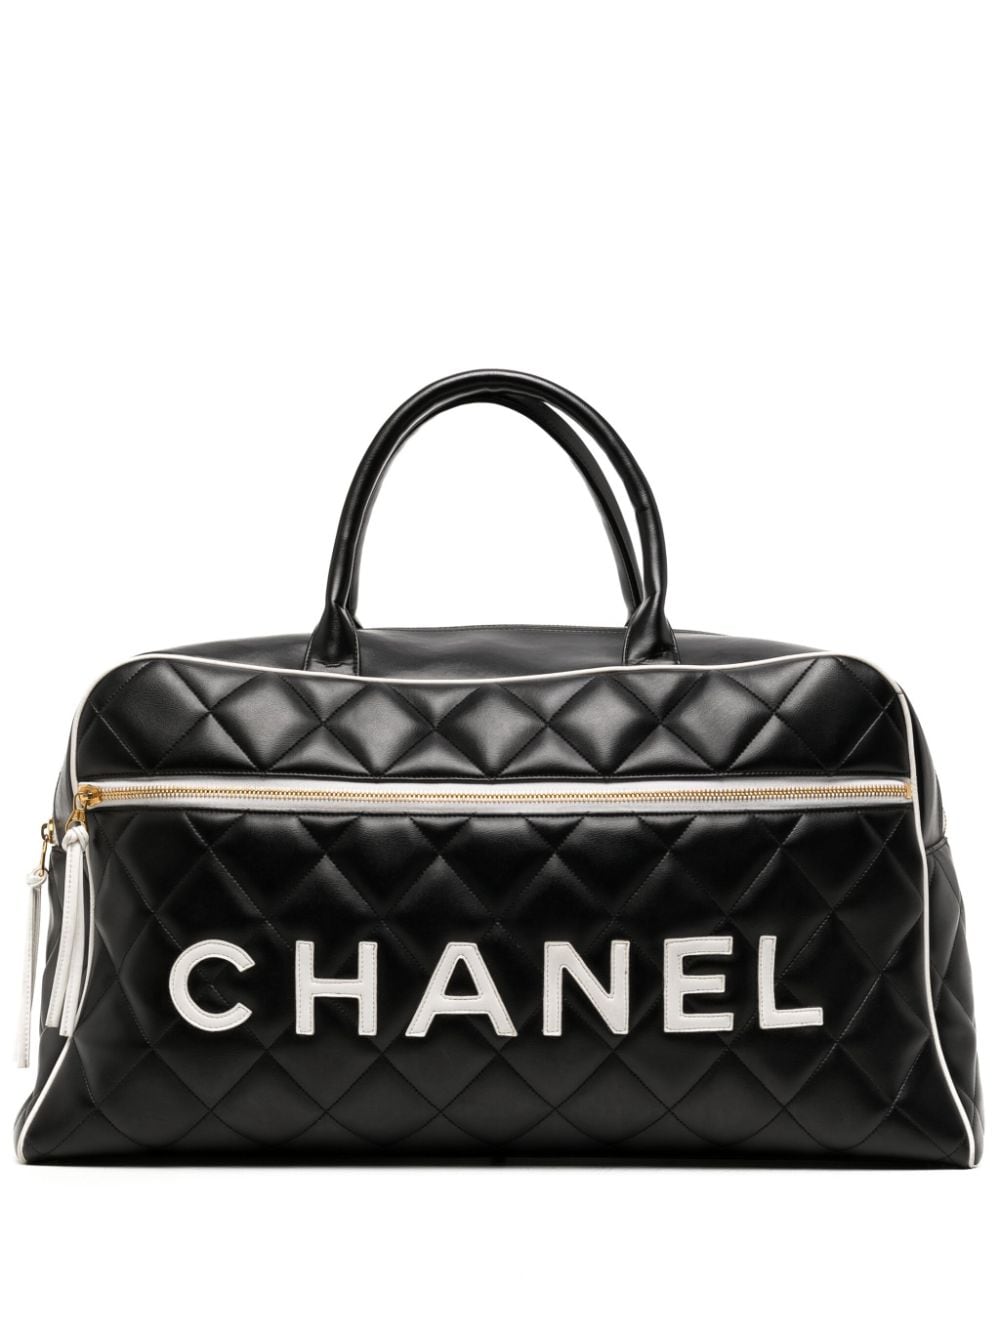 CHANEL Pre-Owned 1994-1996 diamond-quilted holdall bag